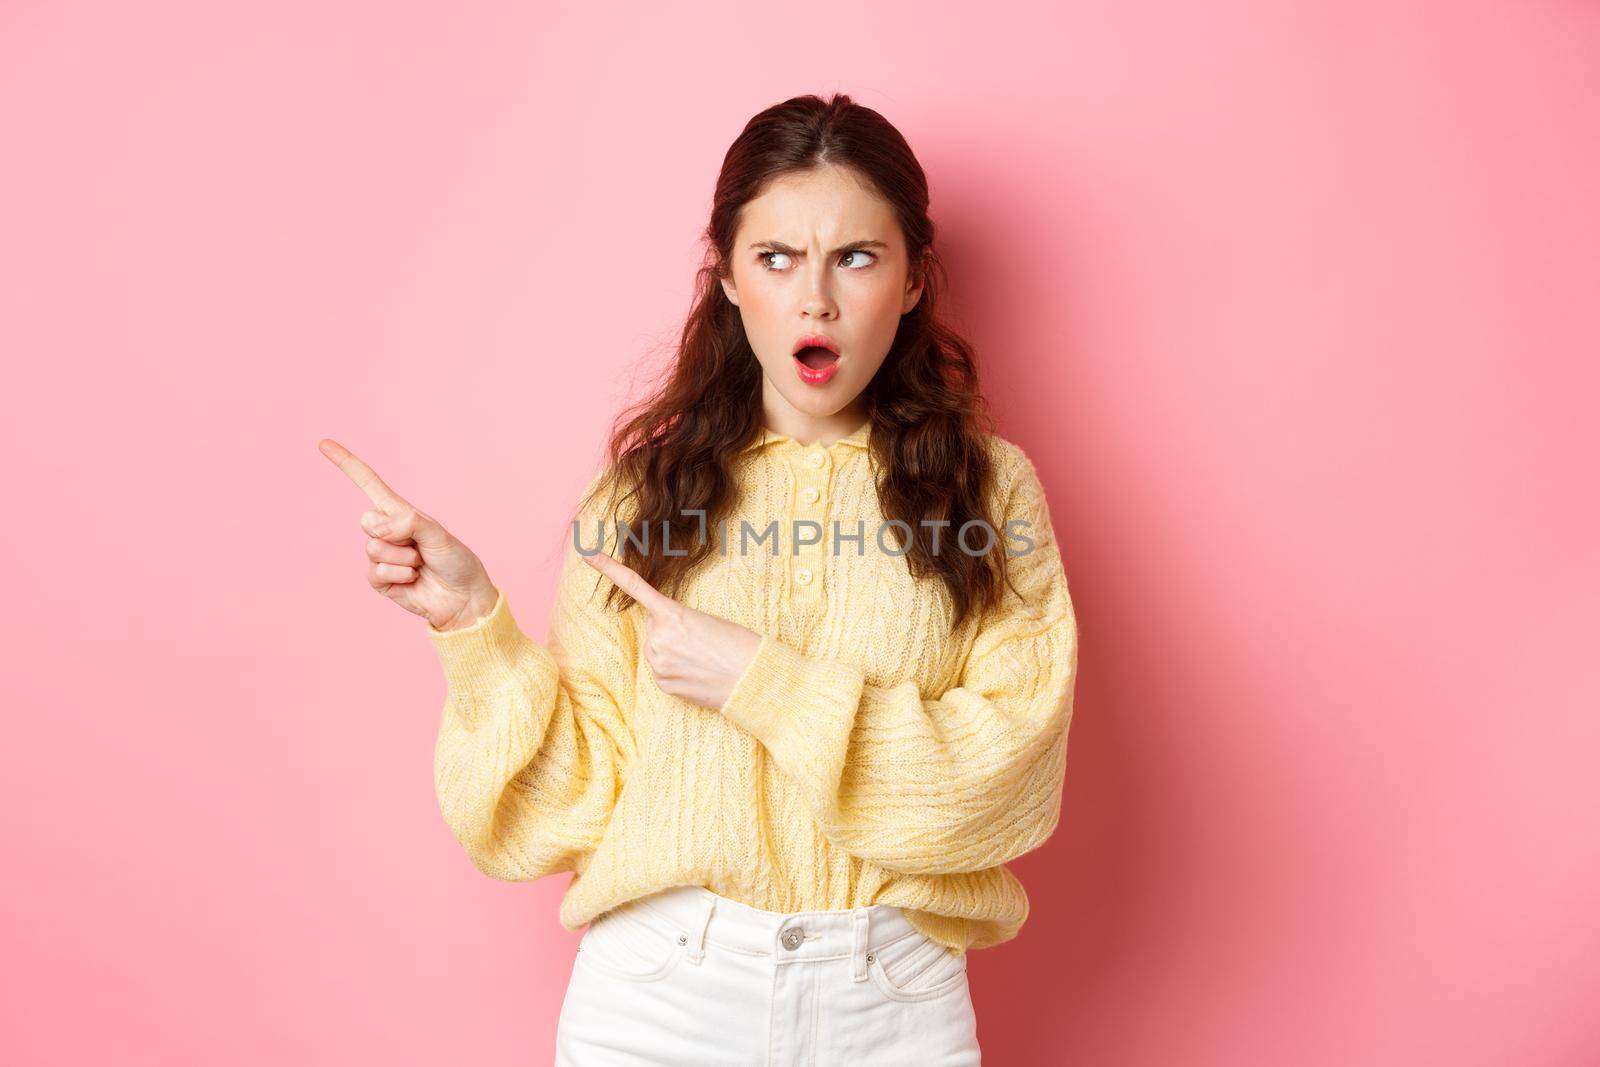 Offended and shocked young woman staring and pointing fingers left at copyspace aside, insulted by something, gasping displeased, standing against pink background.